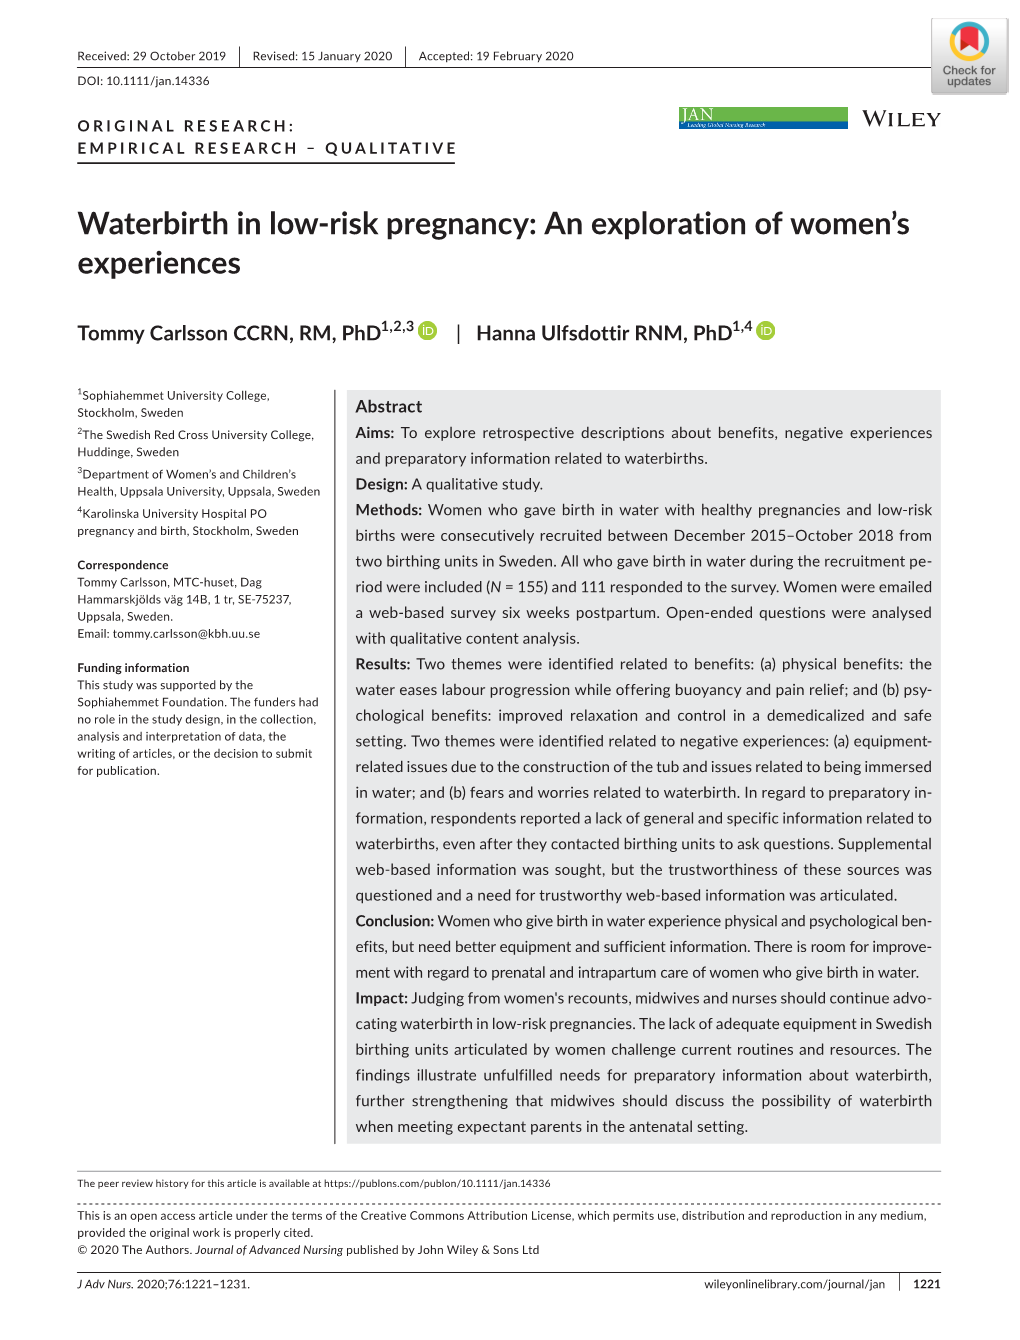 Waterbirth in Low‐Risk Pregnancy: an Exploration of Women's Experiences